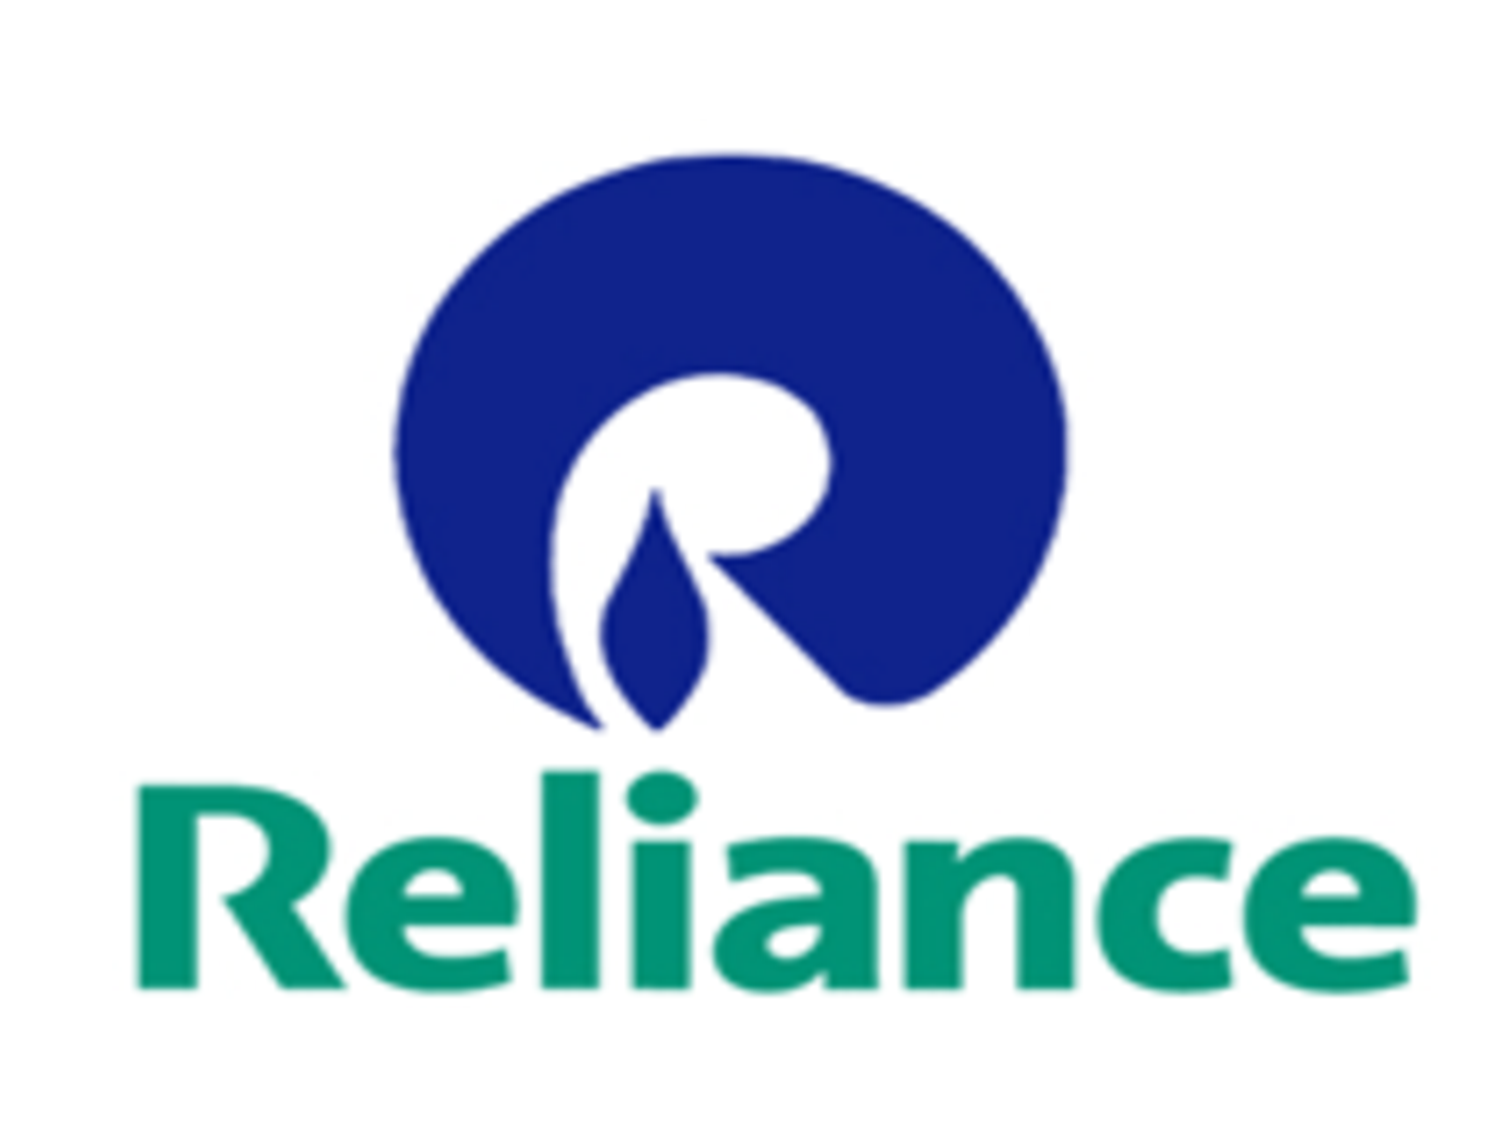 Free Download The Gallery For Reliance Industries Logo Png 1500x1125 For Your Desktop Mobile Tablet Explore 97 Jio Logo Wallpapers Jio Logo Wallpapers Logo Backgrounds Logo Wallpaper